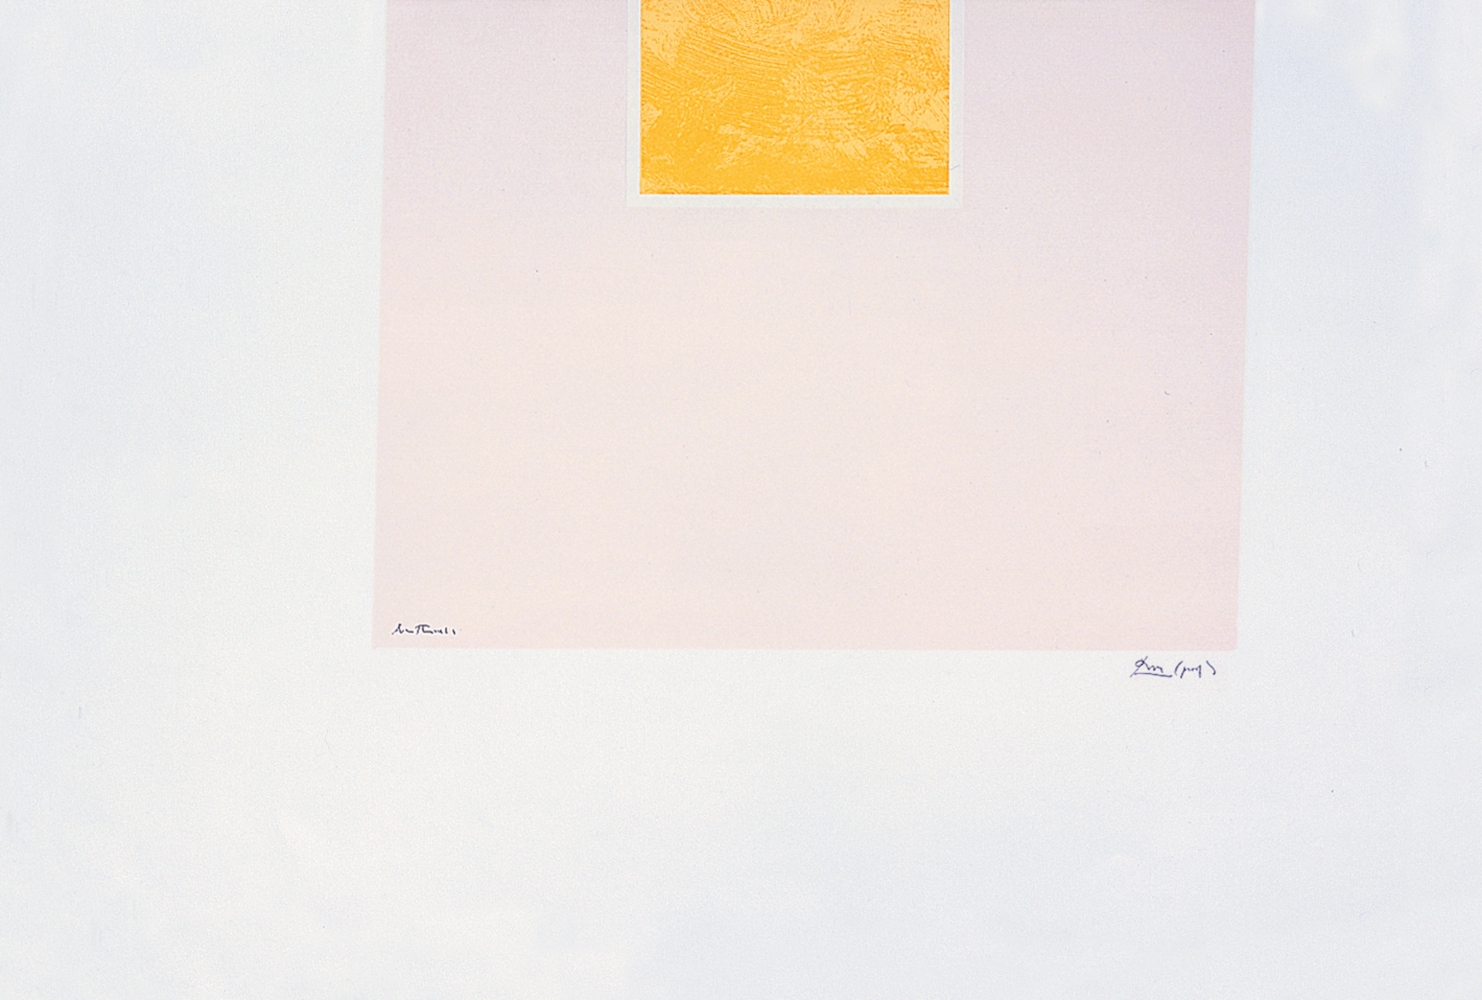 London Series II: Untitled (Orange/Pink), 1971

screenprint on white J.B. Green mould-made Double Elephant paper, edition of 150

28 1/2 x 41 in. / 71.8 x 104.1 cm